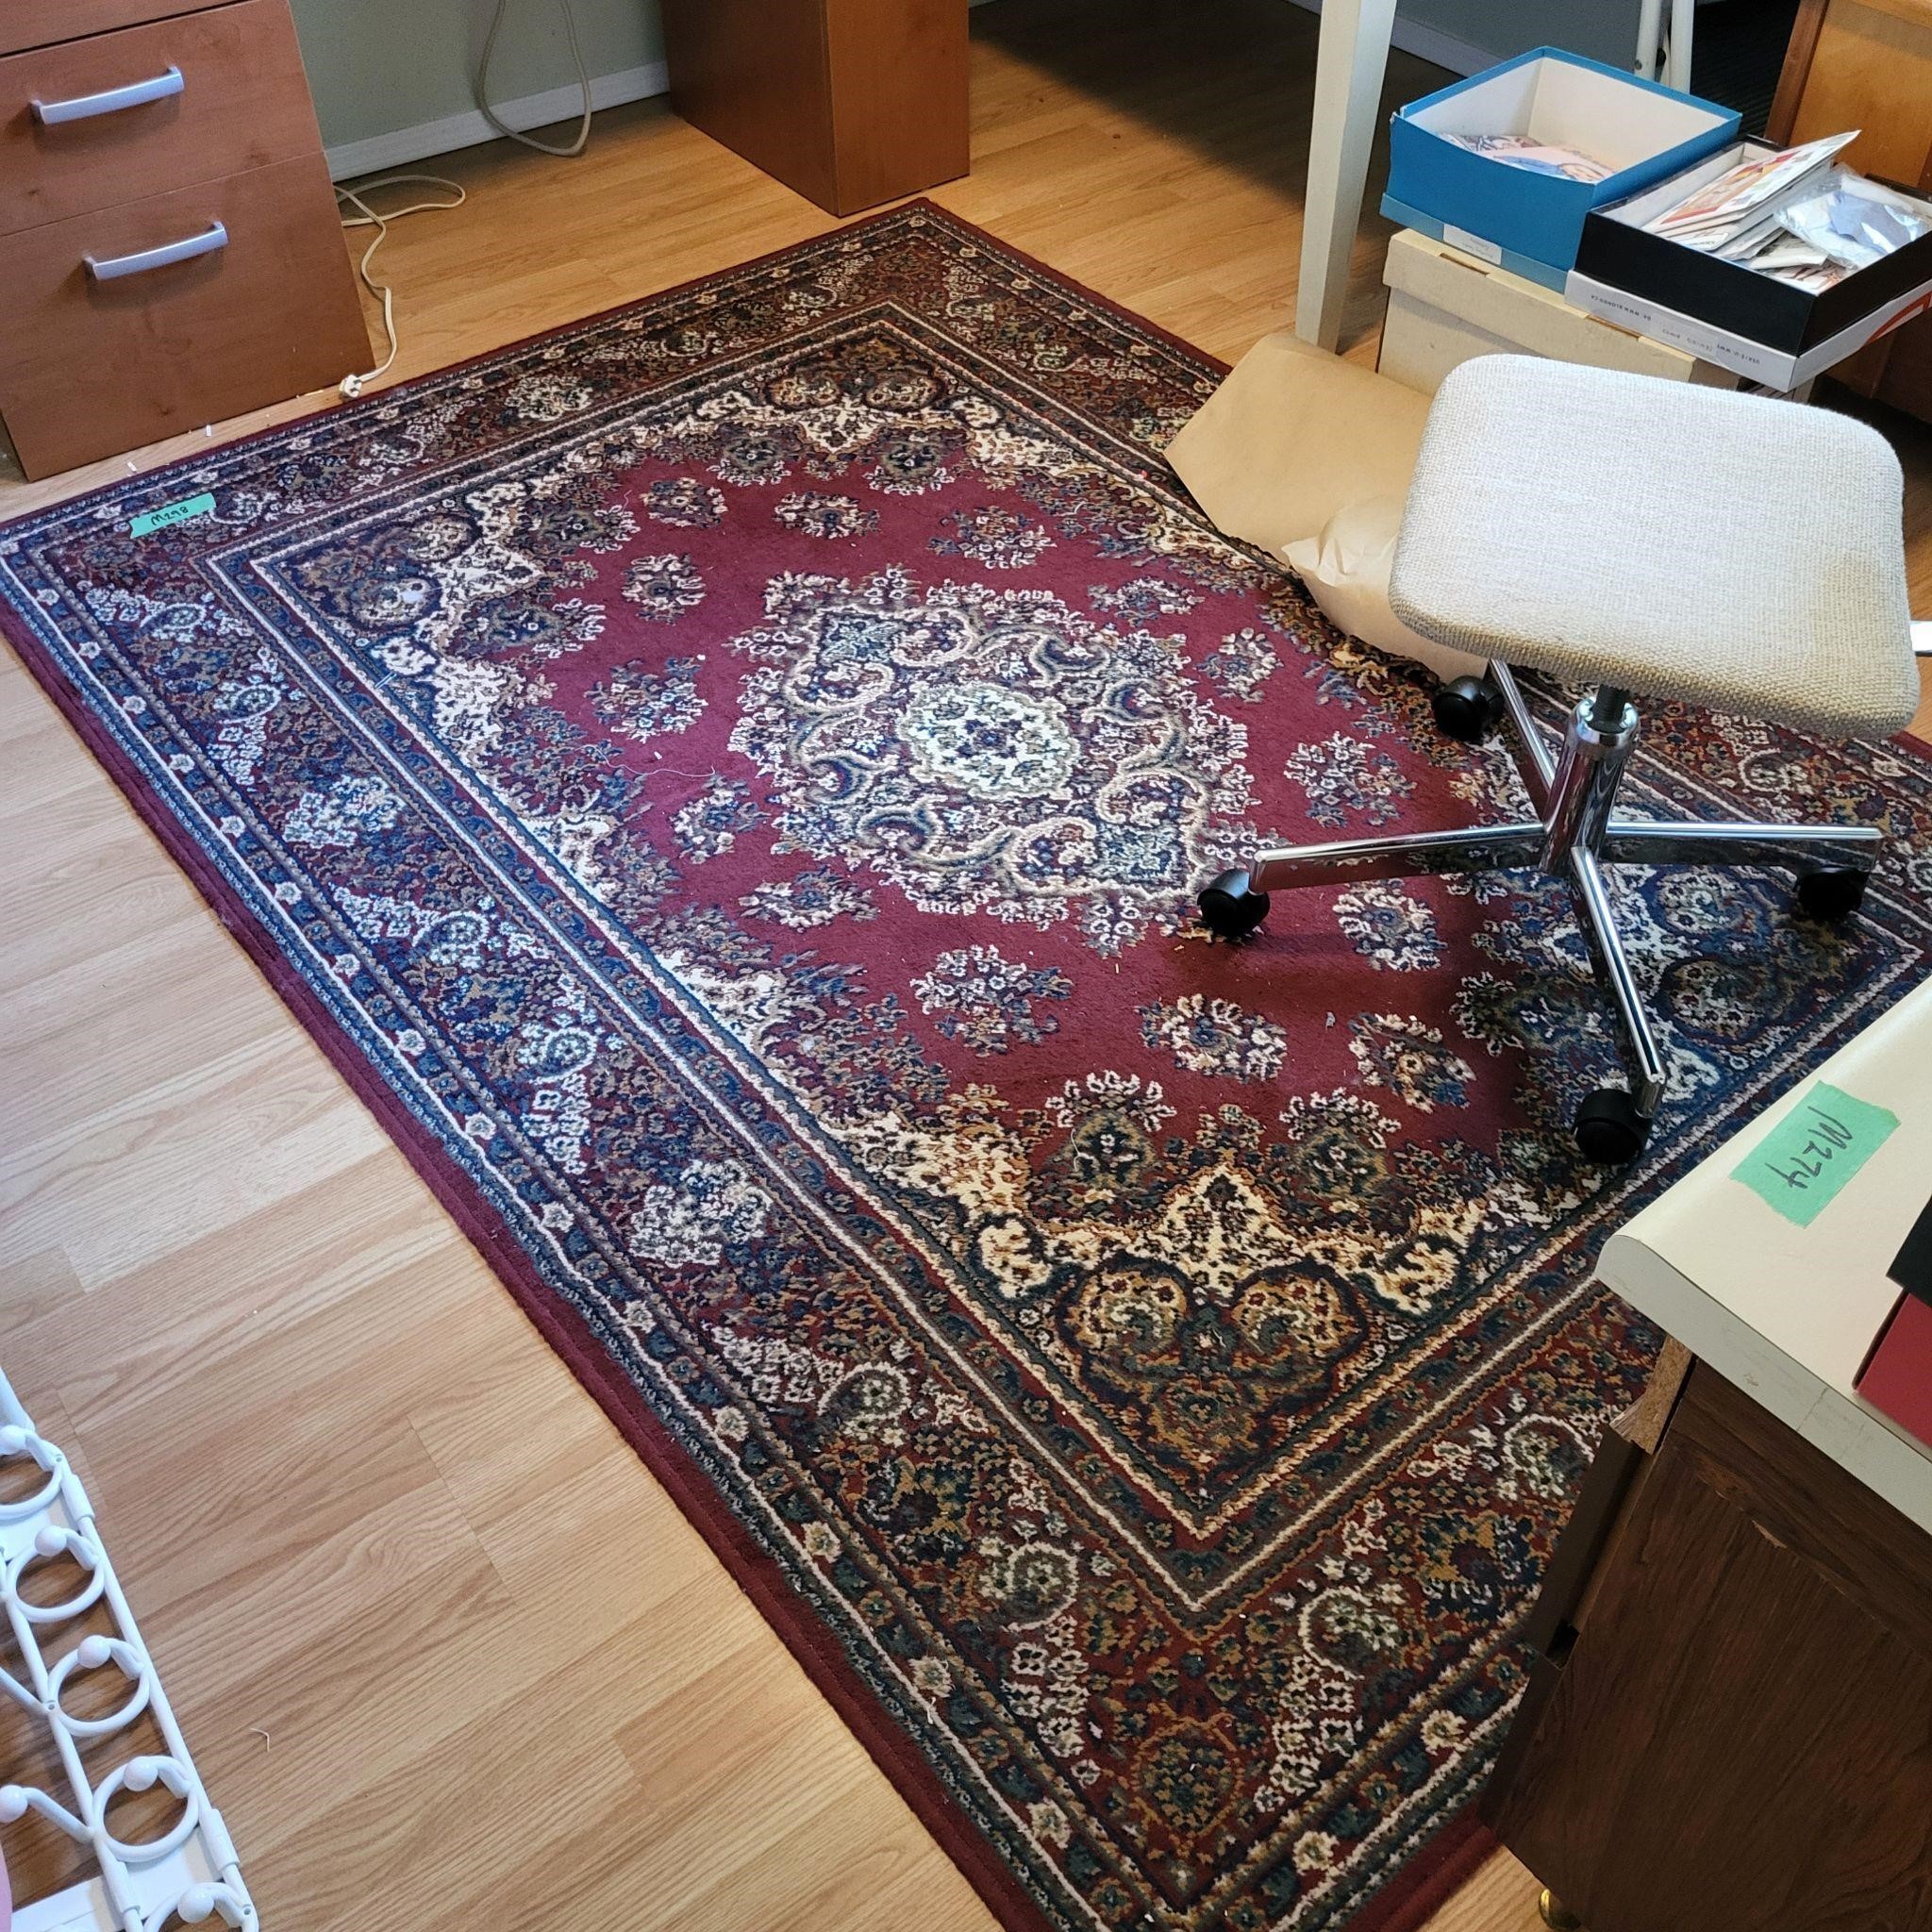 M298 Large area rug approx 5'x7'